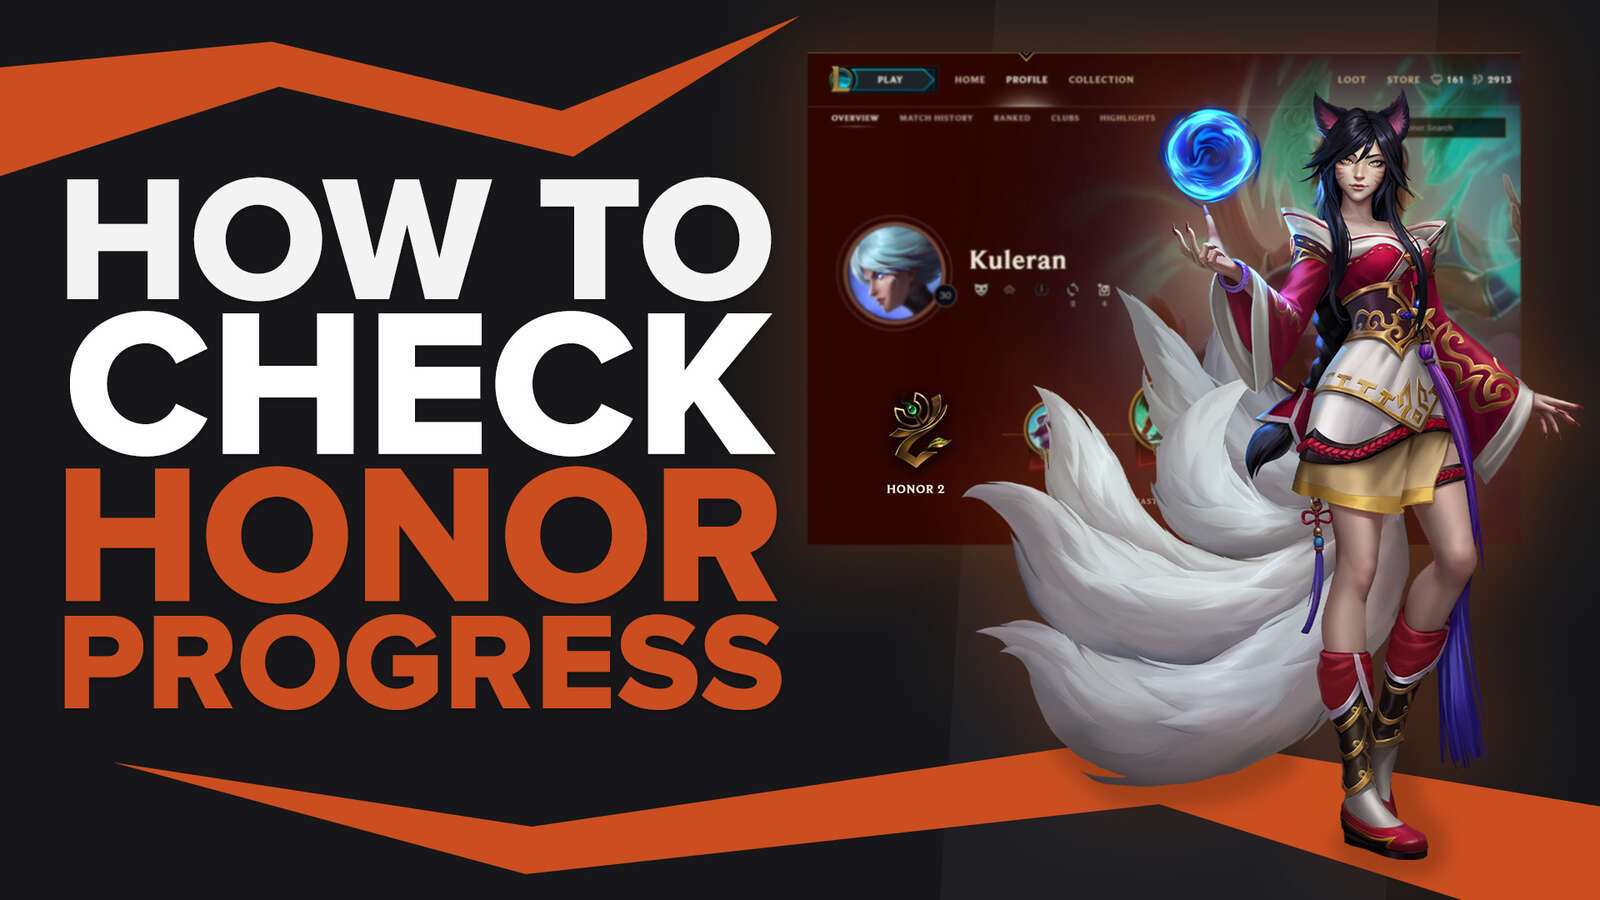 How To Easily Check Honor Progress in LoL [Step-by-Step]